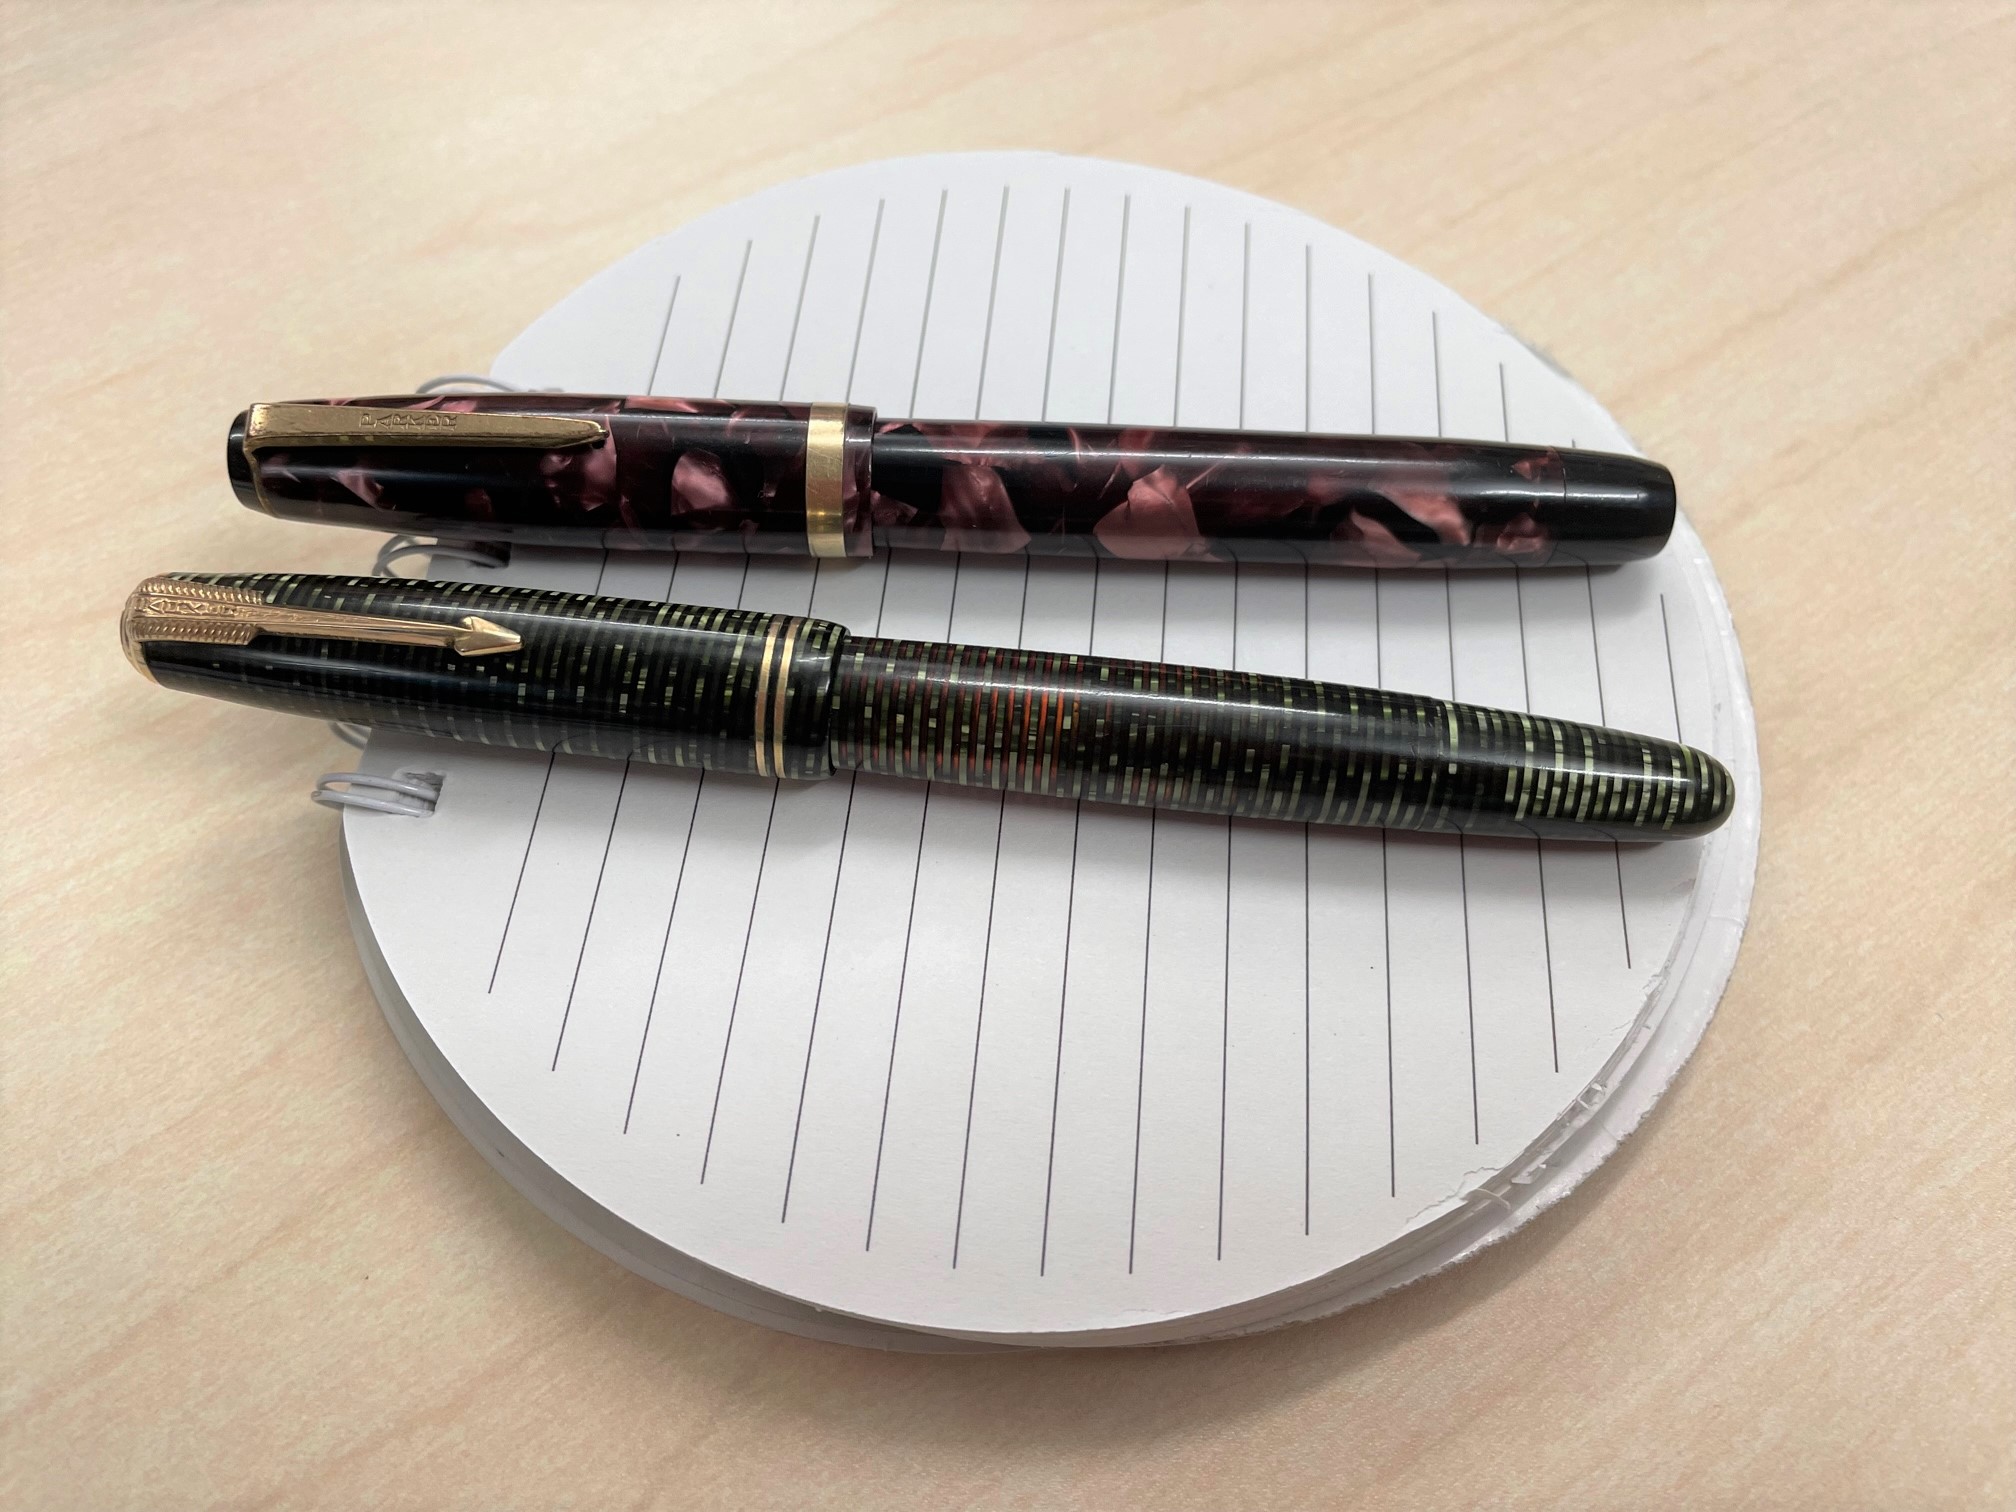 Can Montblanc draw the in-crowd with leather goods and collabs